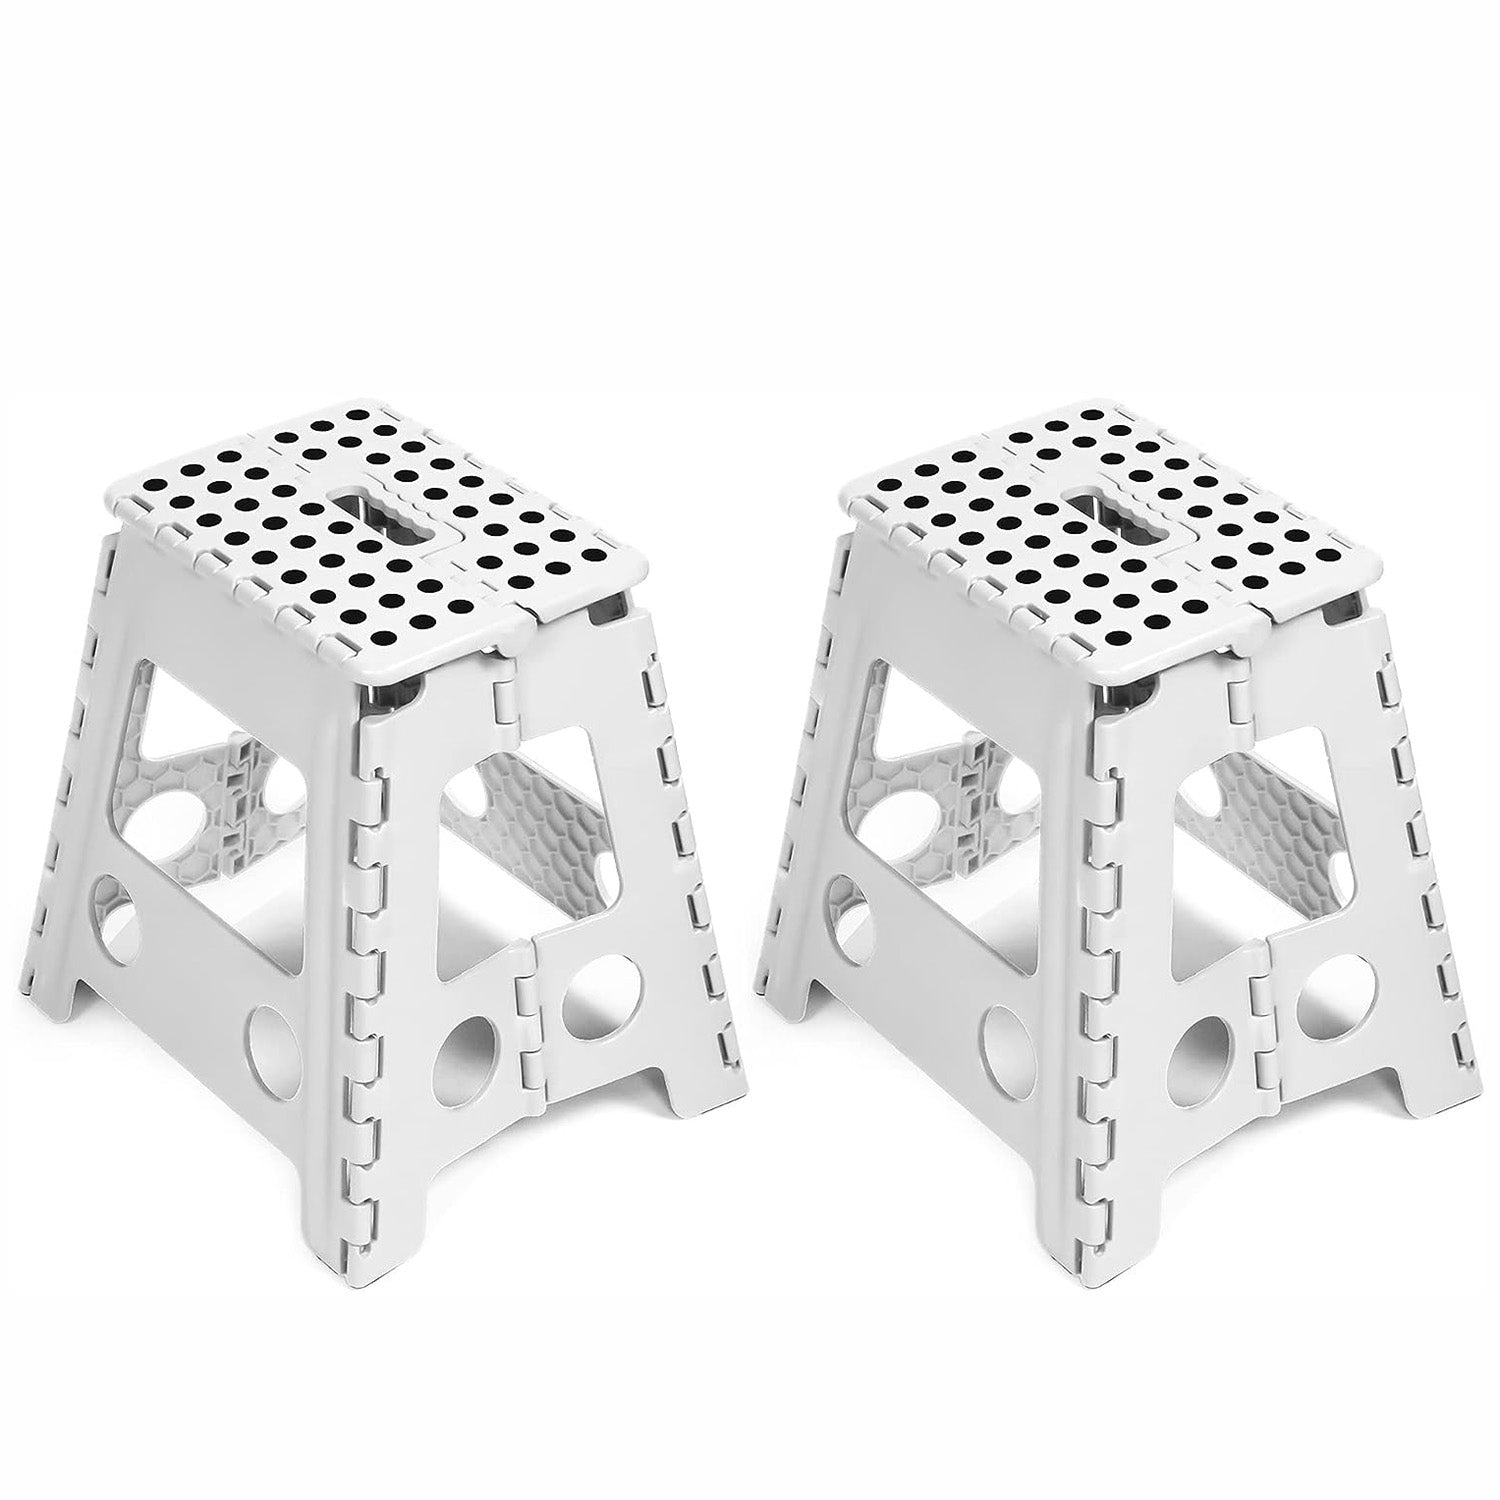 Set of 2 Folding Step Stool 15.7" with Non-Slip Surface and Portable Handle, White